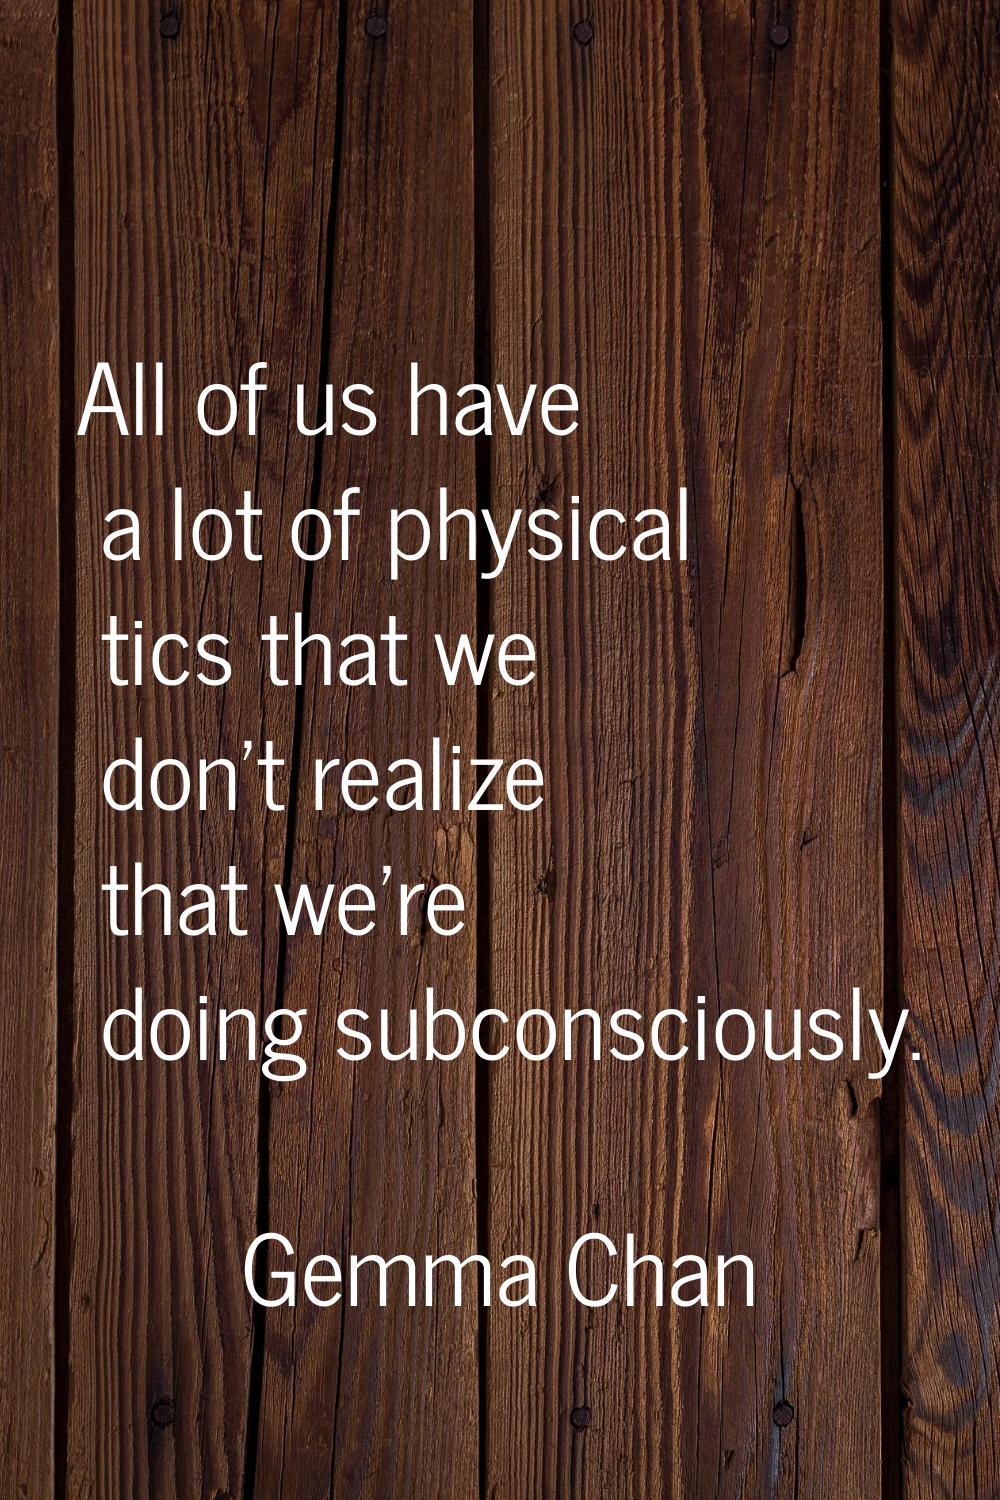 All of us have a lot of physical tics that we don't realize that we're doing subconsciously.